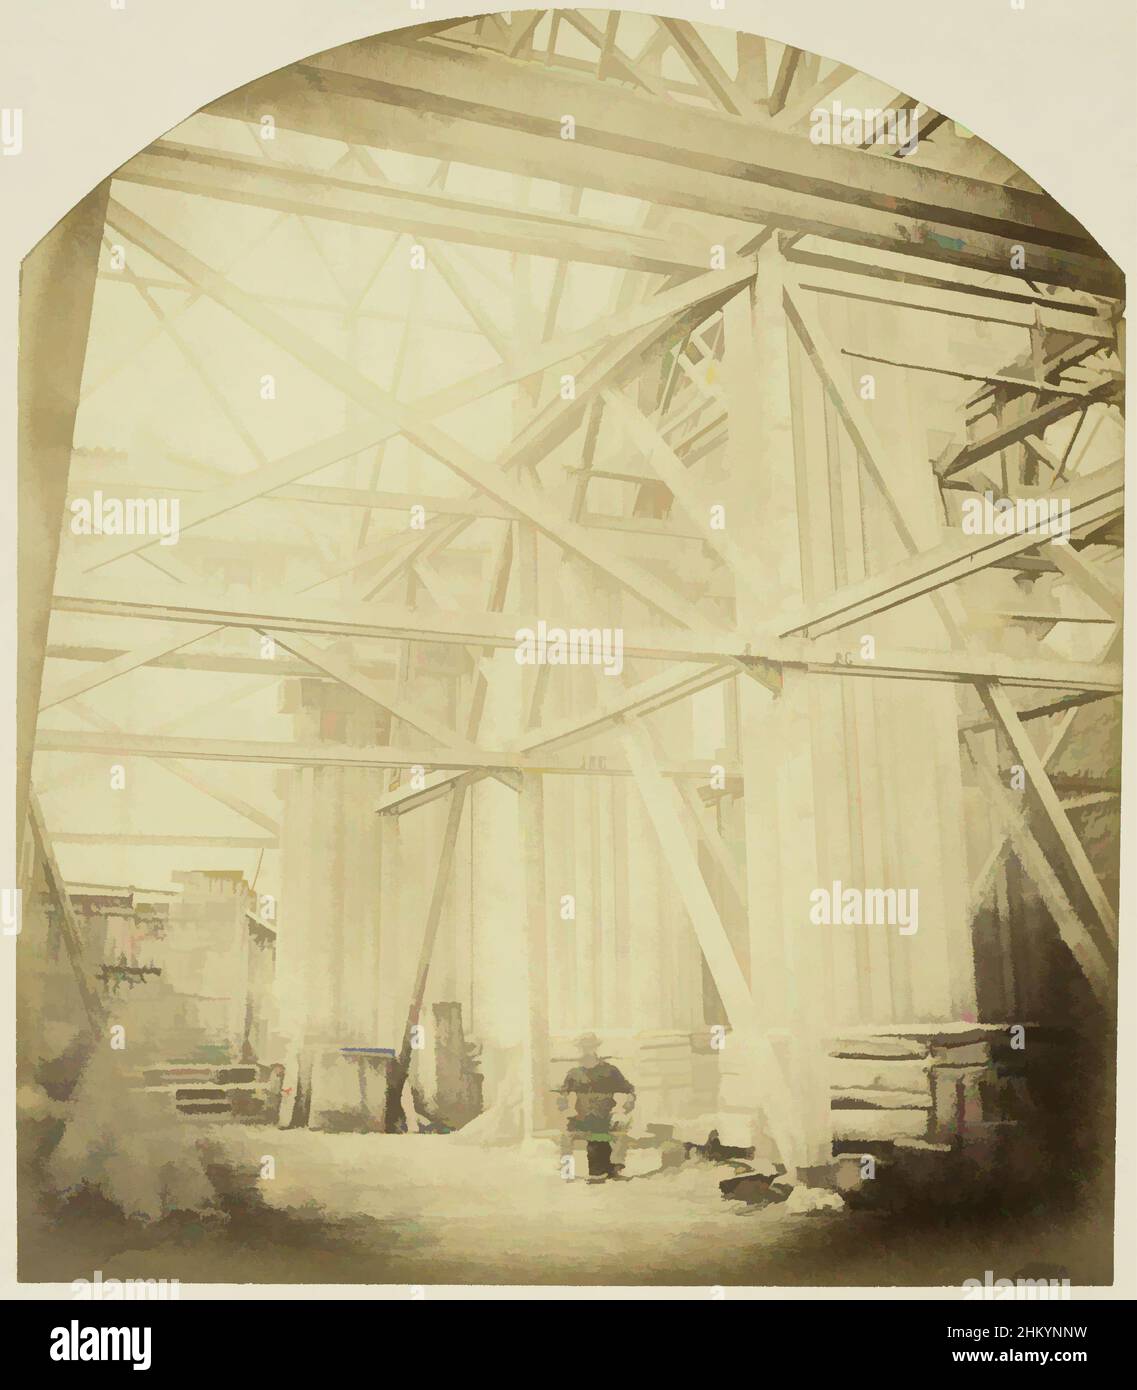 Art inspired by Église Saint-Vincent-de-Paul at Marseille under construction, Adolphe Terris (attributed to), Fred Vitigliano (attributed to), Marseille, 1855 - 1860, paper, cardboard, albumen print, height 191 mm × width 166 mmheight 366 mm × width 295 mm, Classic works modernized by Artotop with a splash of modernity. Shapes, color and value, eye-catching visual impact on art. Emotions through freedom of artworks in a contemporary way. A timeless message pursuing a wildly creative new direction. Artists turning to the digital medium and creating the Artotop NFT Stock Photo